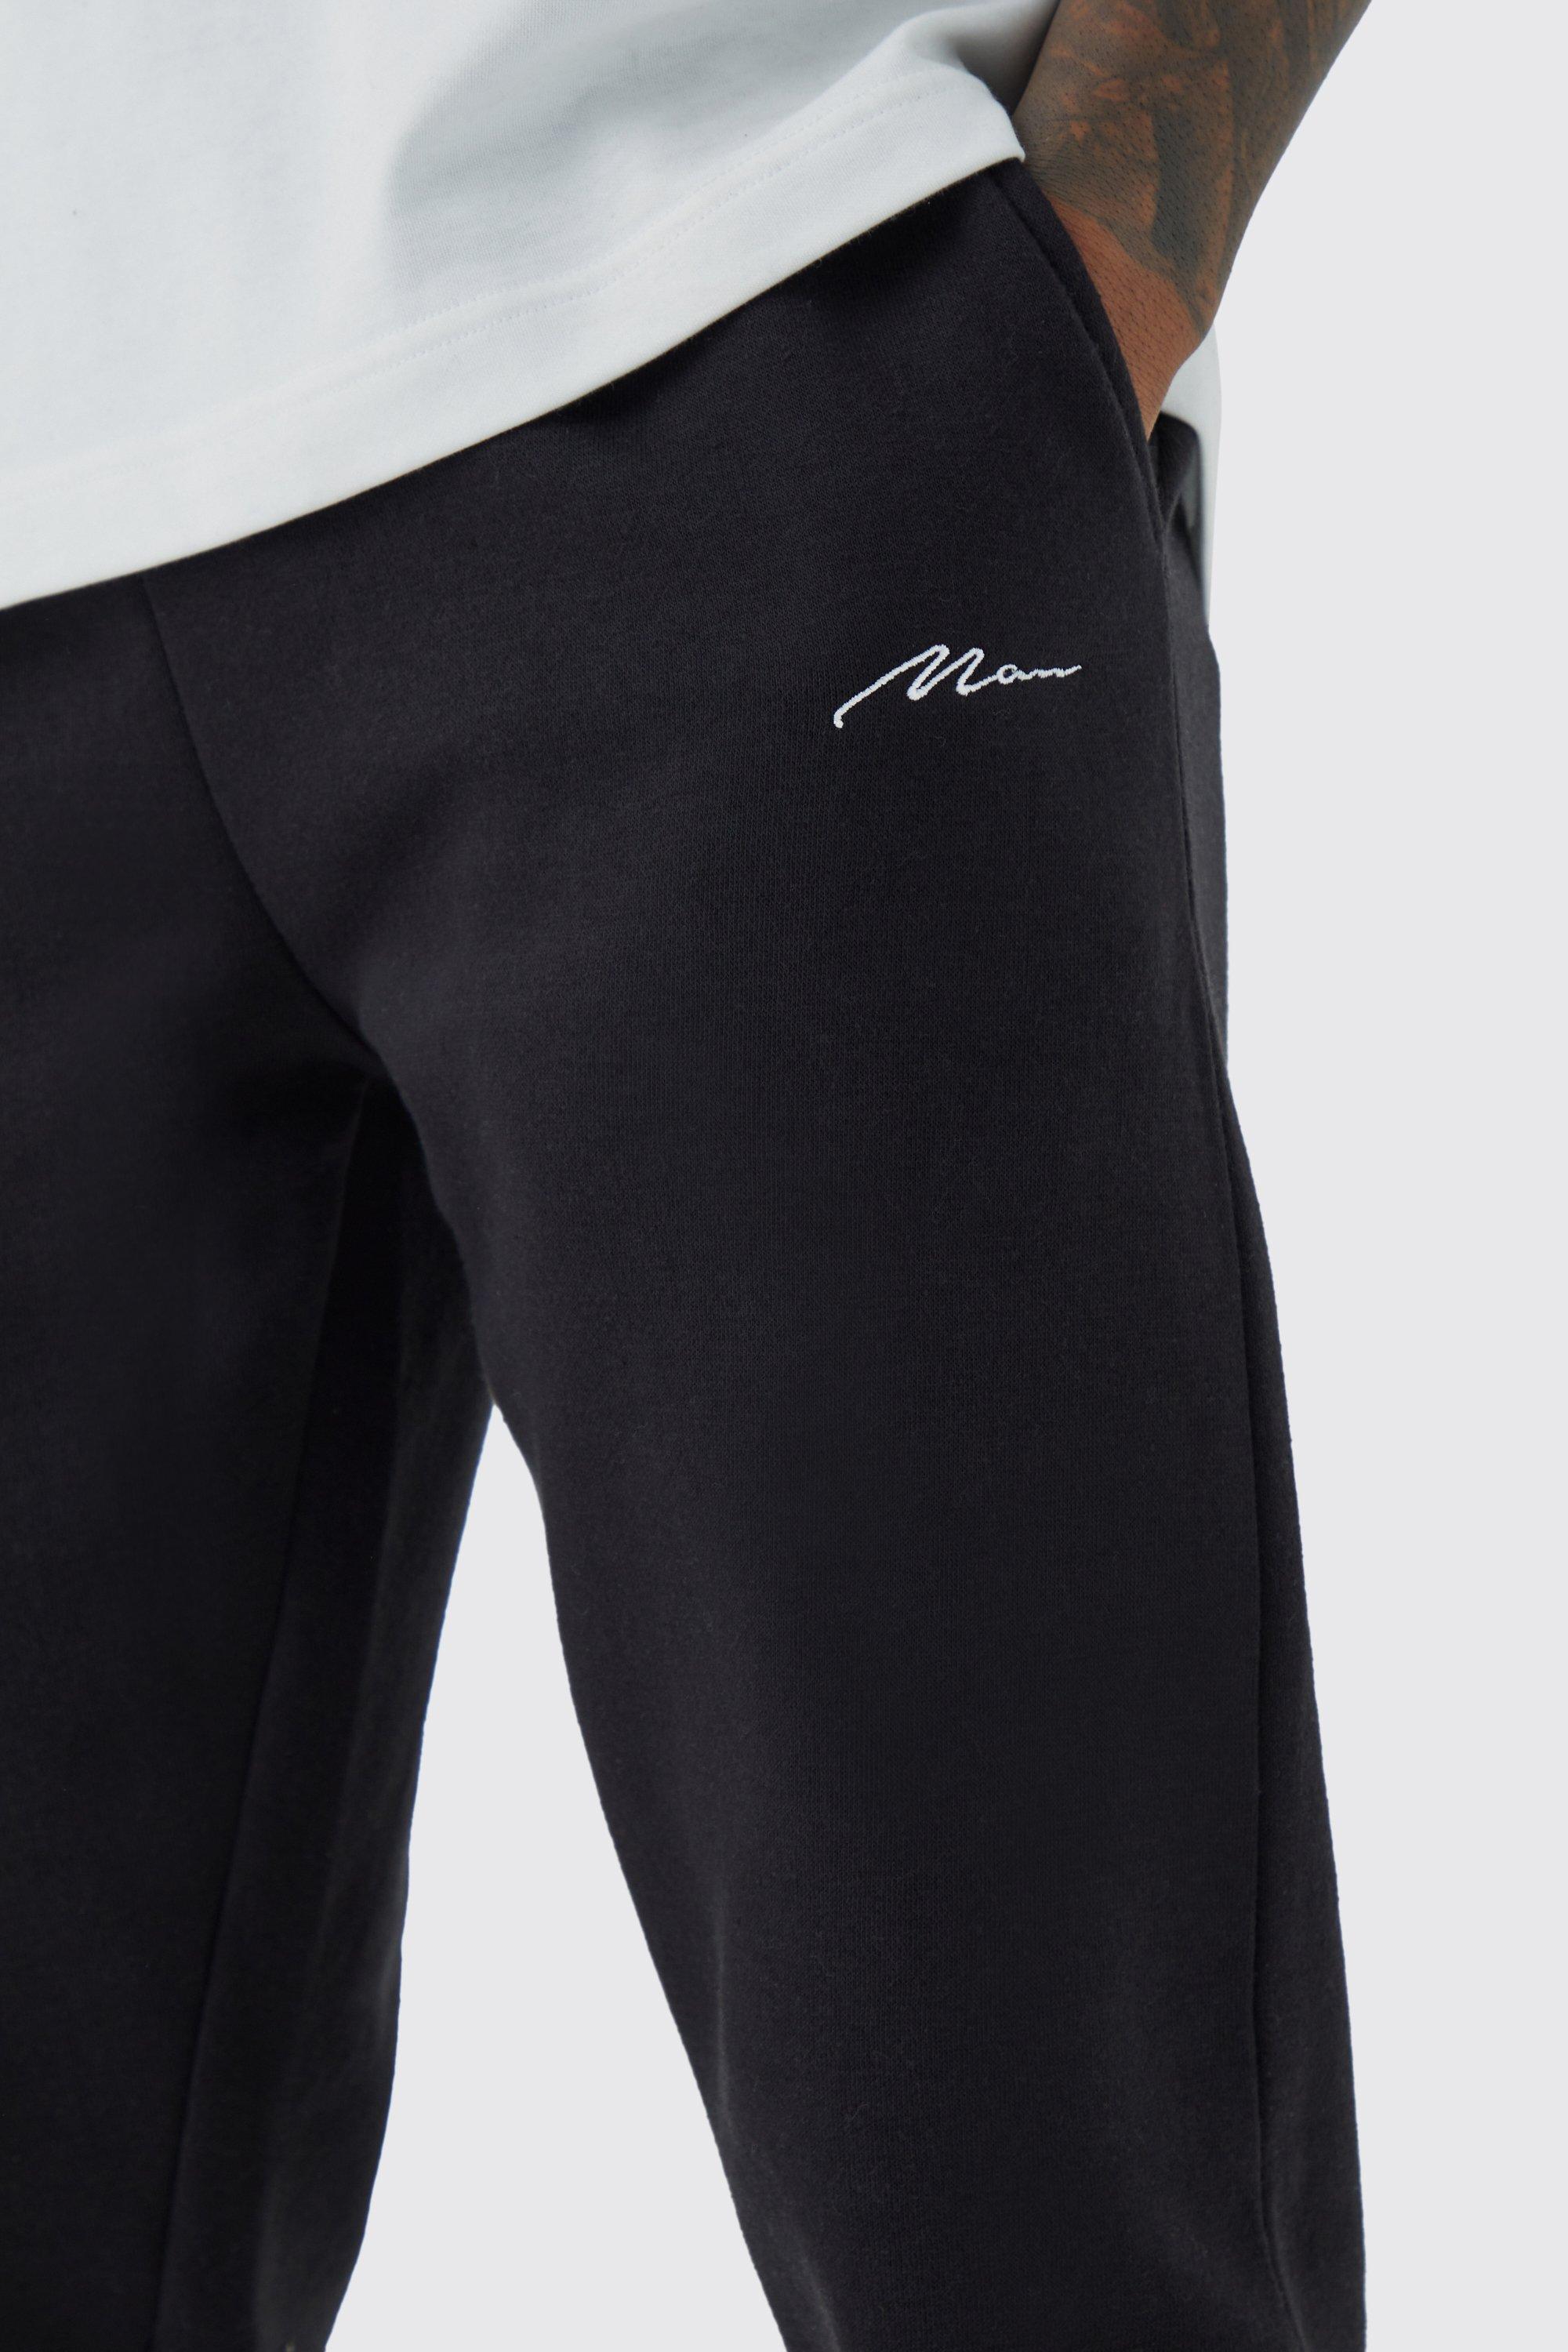 Slim Fit Joggers with Embroidered Logo